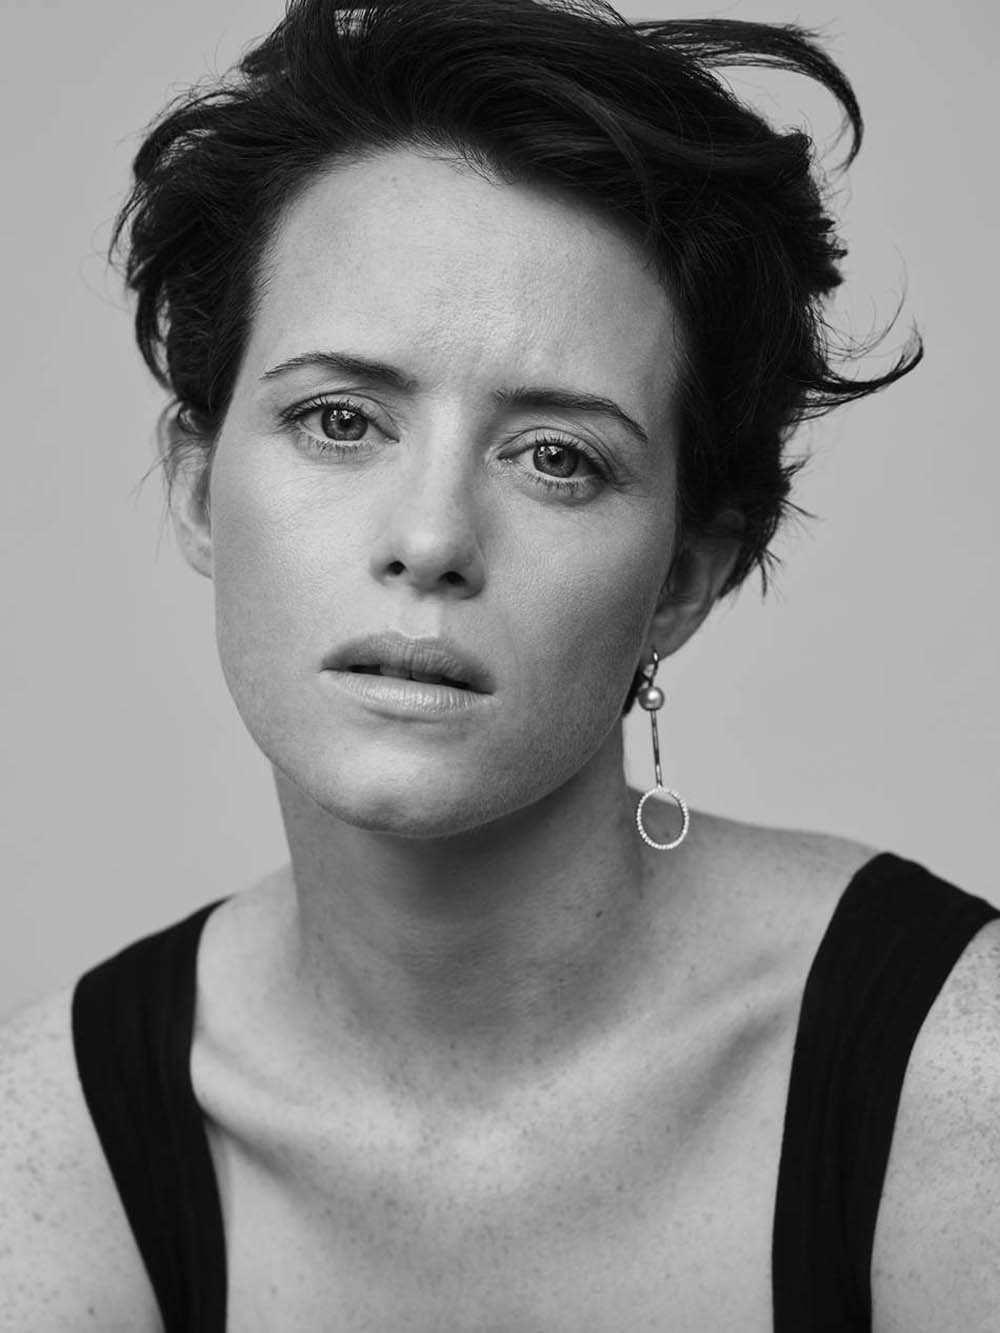 Claire Foy covers Porter Edit October 12th, 2018 by Liz Collins